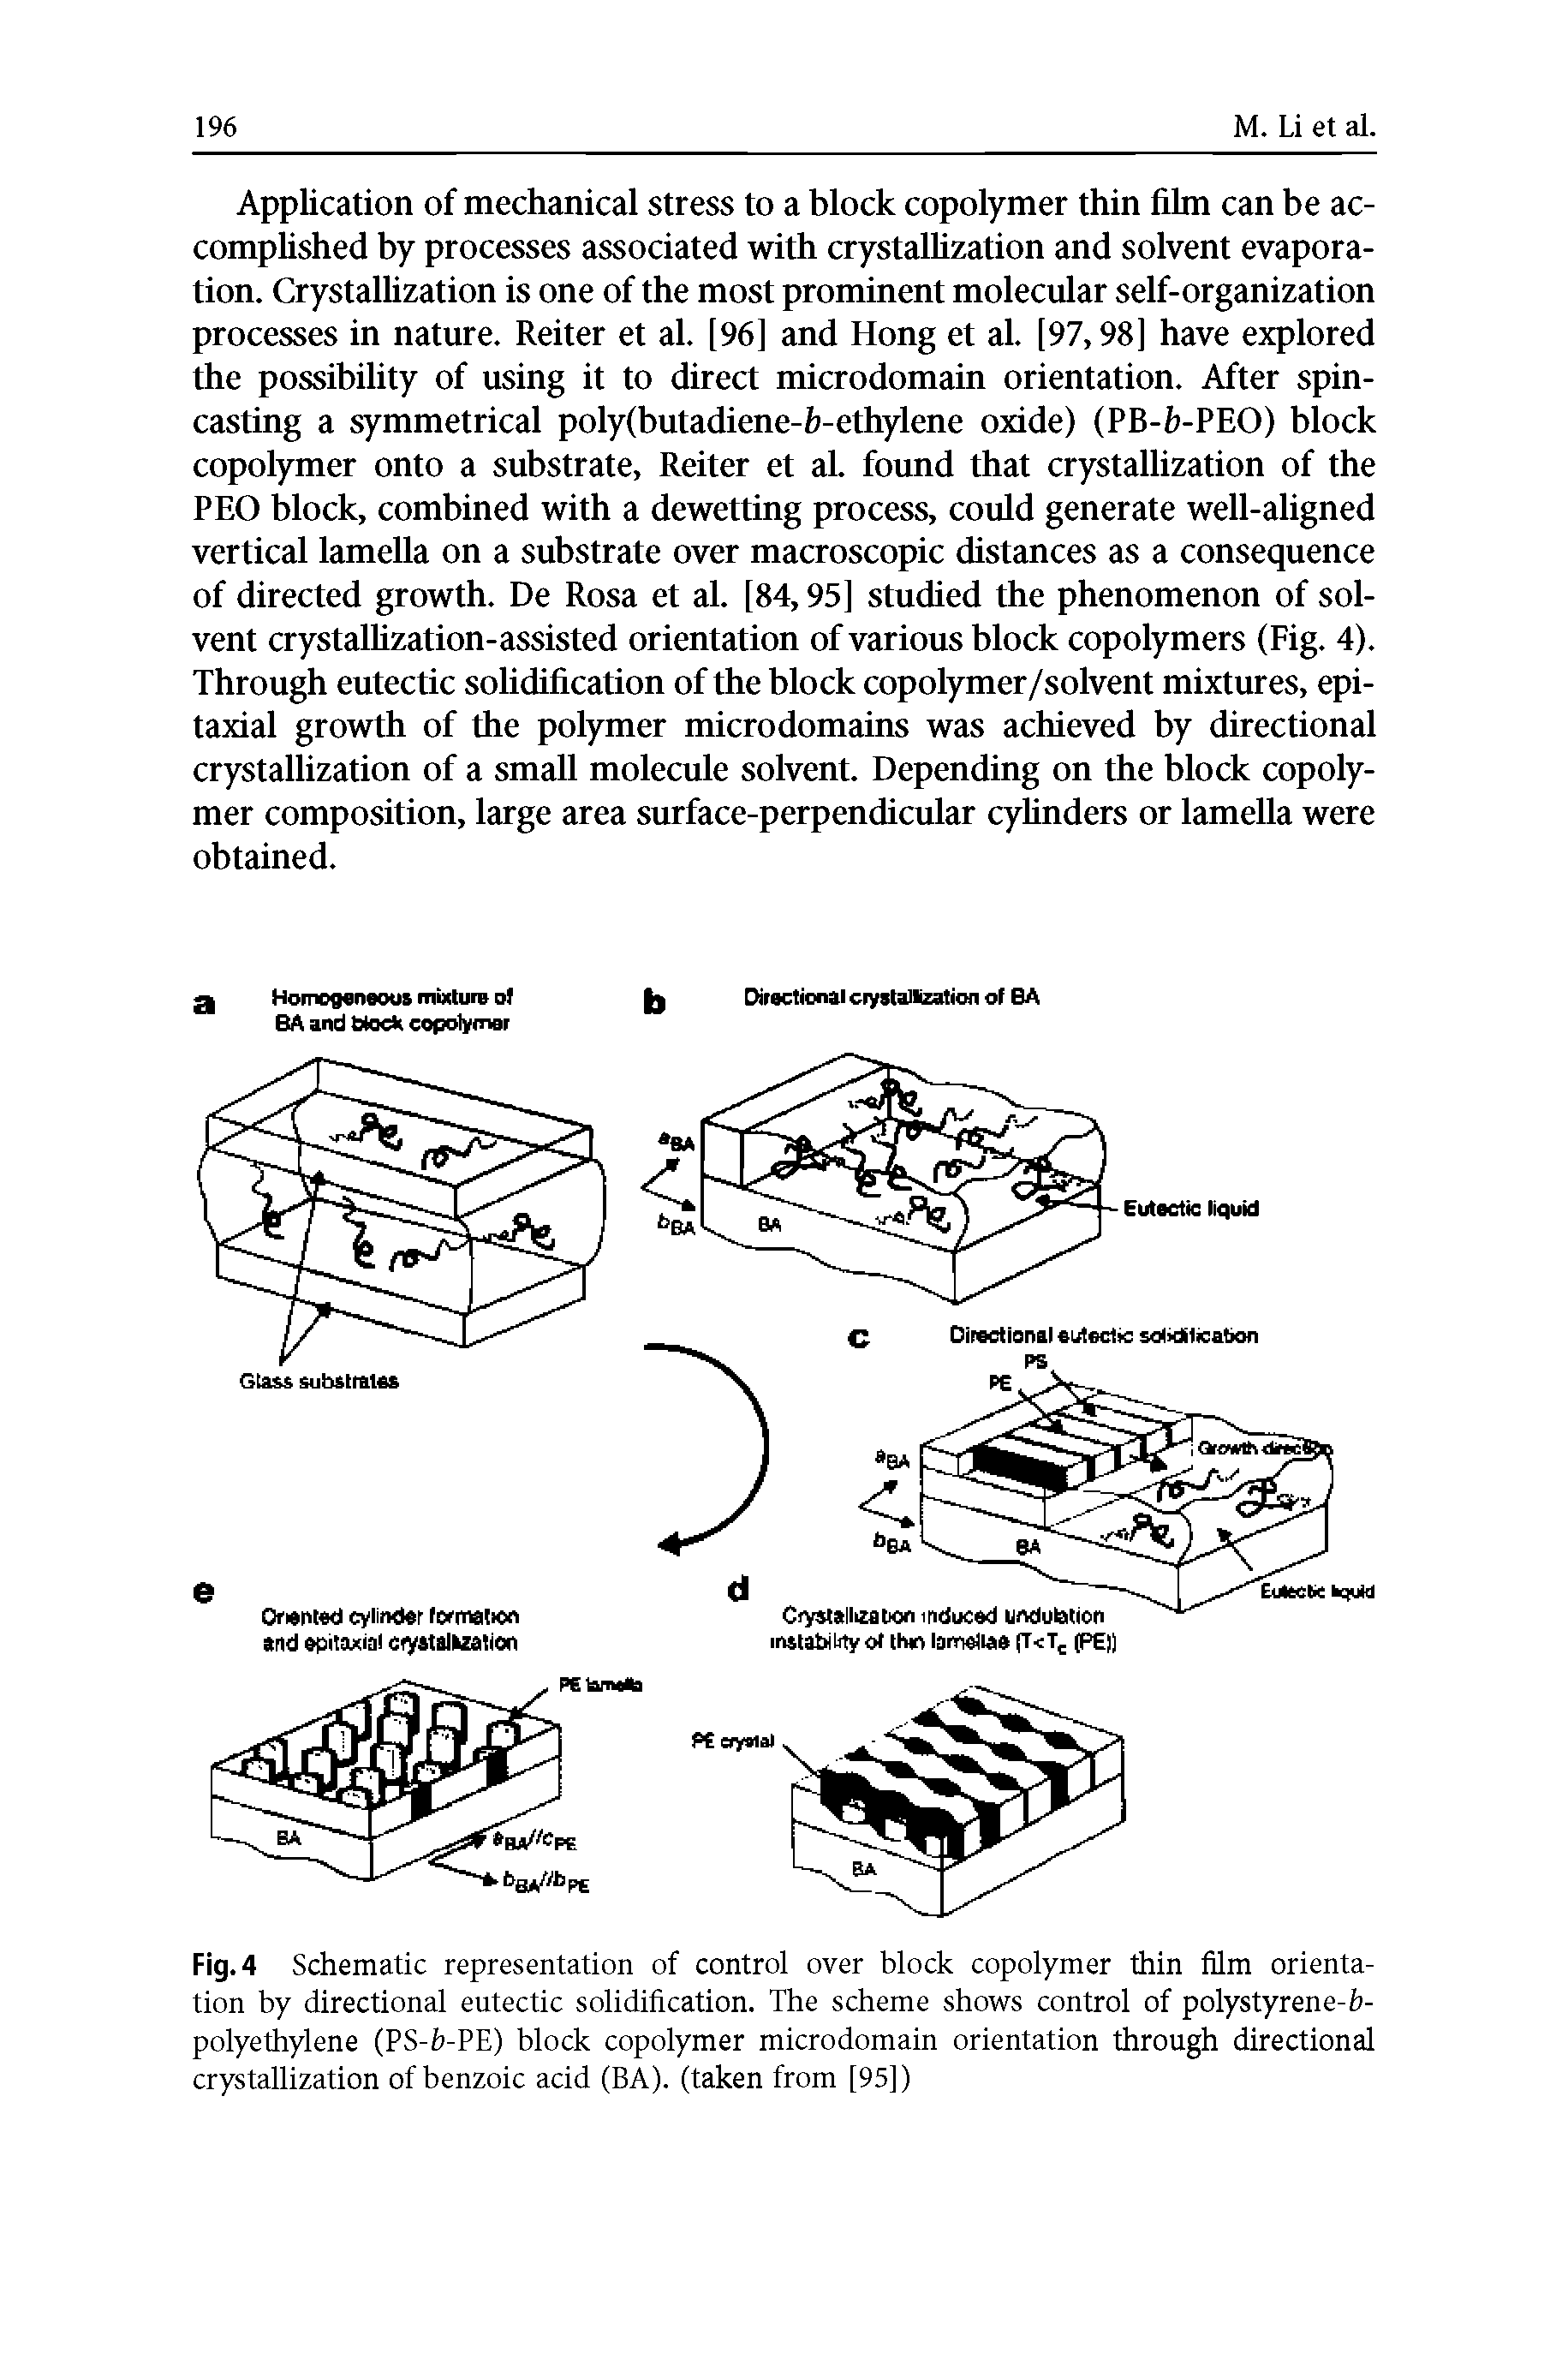 Fig. 4 Schematic representation of control over block copolymer thin film orientation by directional eutectic solidification. The scheme shows control of polystyrene-b-polyethylene (PS-b-PE) block copolymer microdomain orientation through directional crystallization of benzoic acid (BA), (taken from [95])...